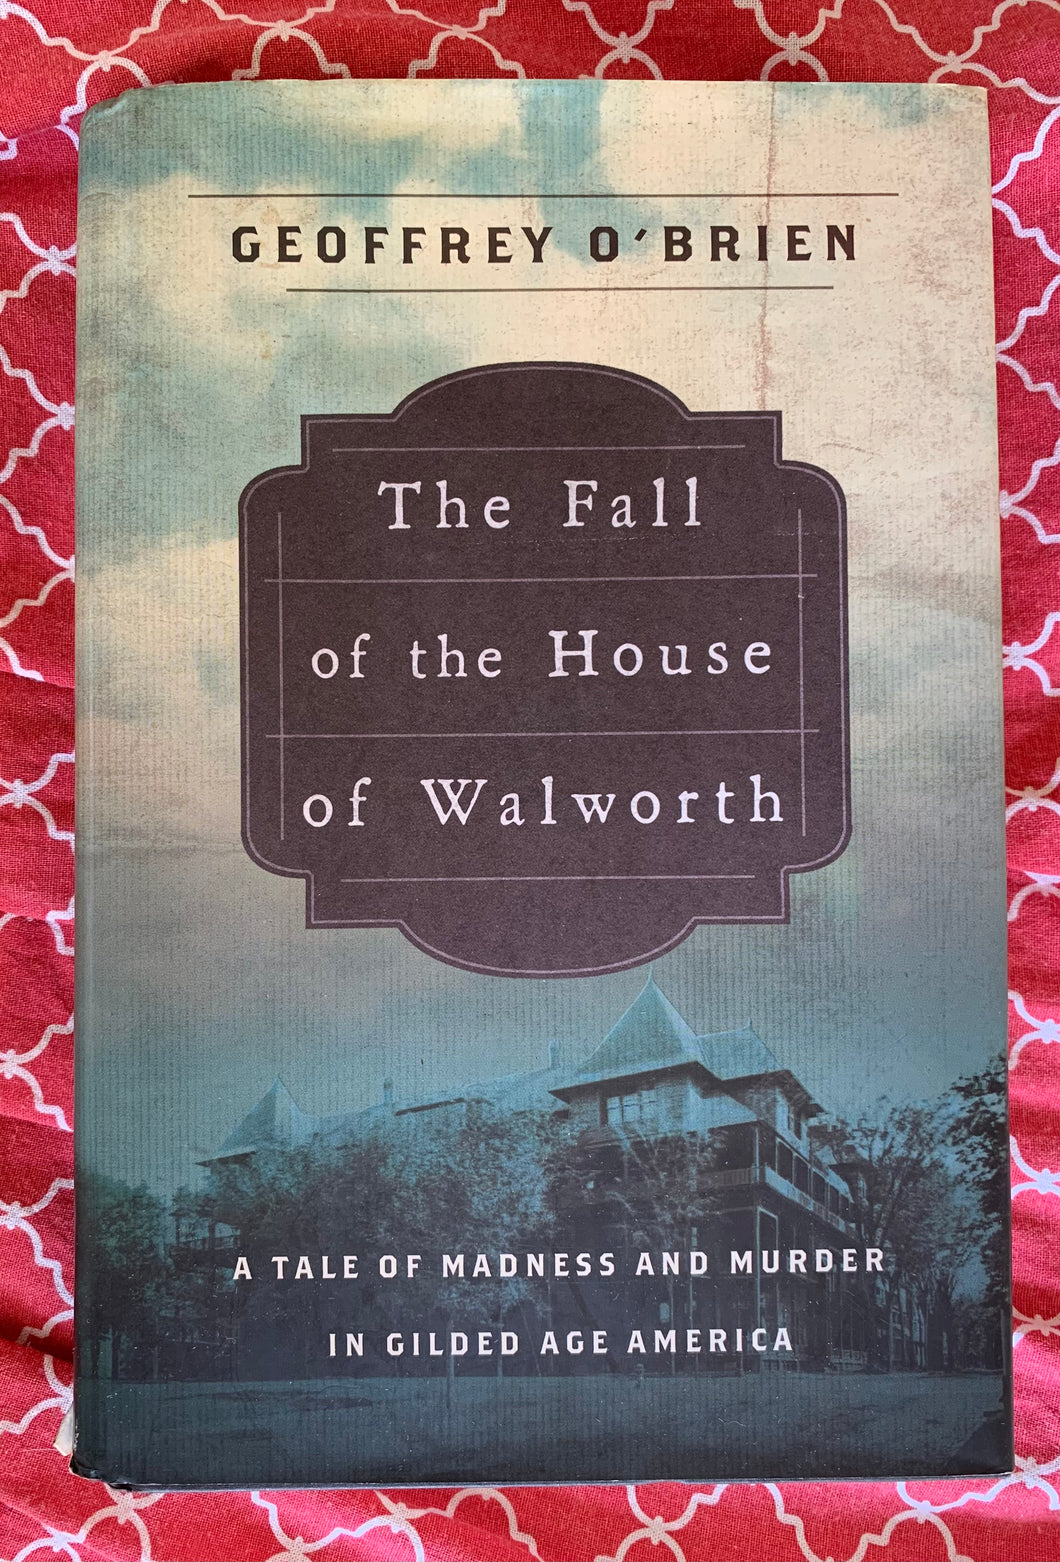 The Fall of the House of Walworth: A Tale of Madness and Murder in Gilded Age America